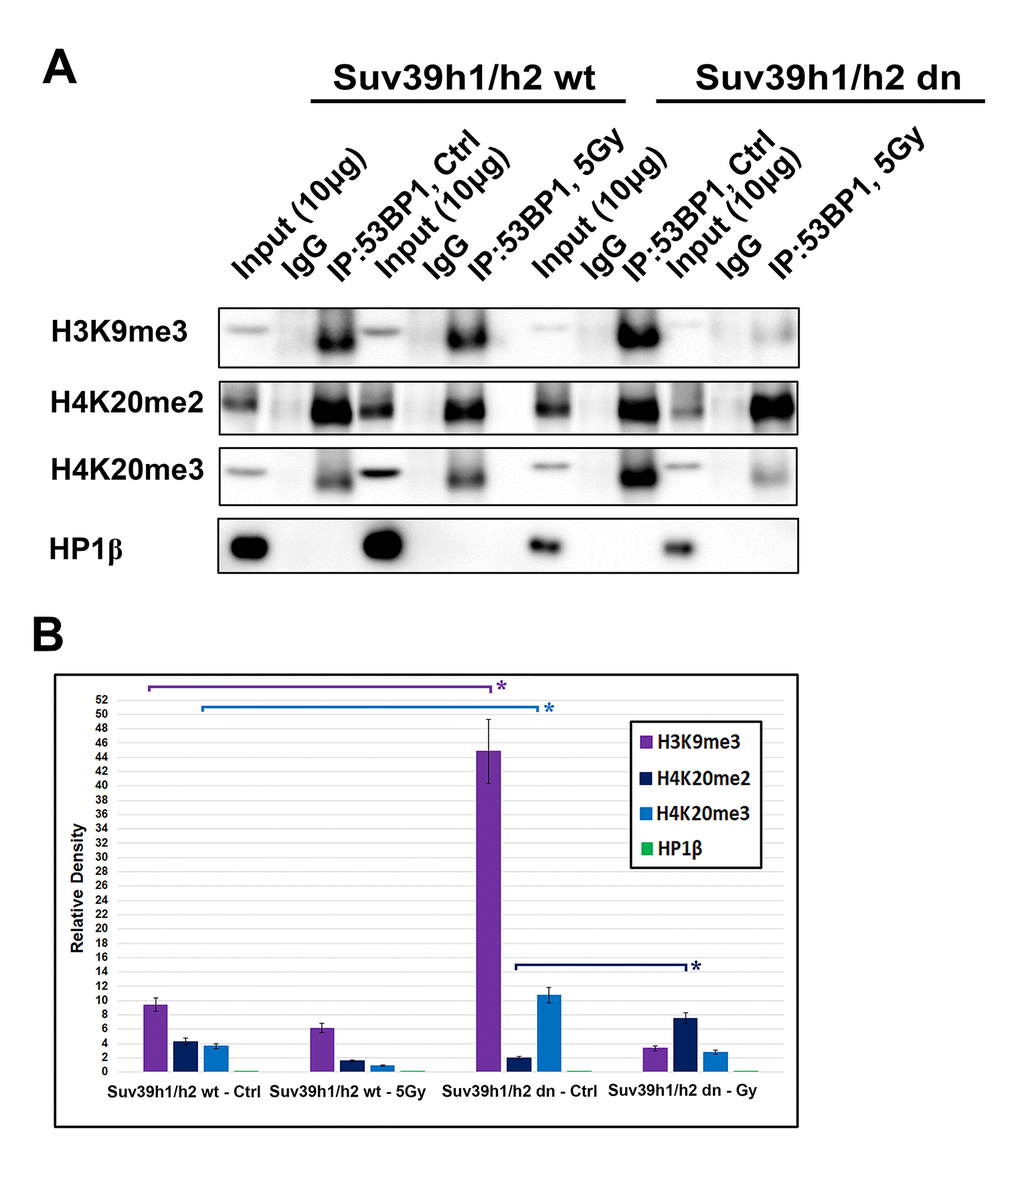 An interaction between 53BP1-H4K20me2/me3. (A) Immunoprecipitation (IP) experiments showed an interaction between H3K9me3 and 53BP1 or H4K20me2 and 53BP1 or H4K20me3 and the 53BP1 protein. HP1β protein did not interact with the 53BP1 protein. (B) Quantification of IP fragments from panel (A) studied in non-irradiated and γ-irradiated Suv39h1/h2 wt and Suv39h1/h2 dn cells. Asterisks (*) indicate statistical significance at P≤0.05.